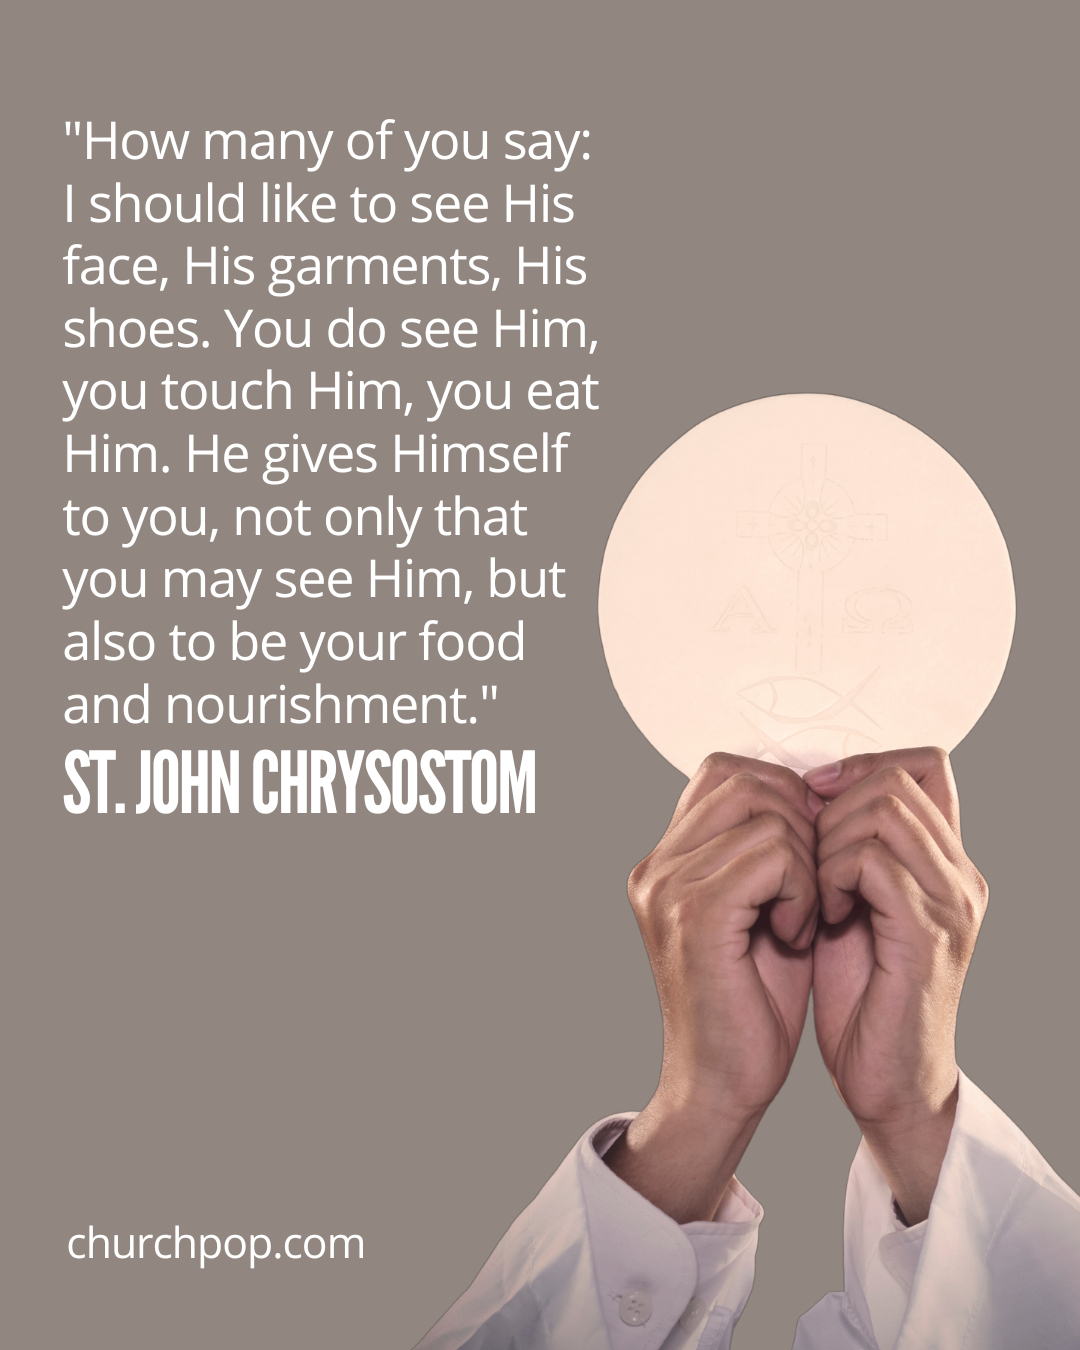 Why Eucharist is important